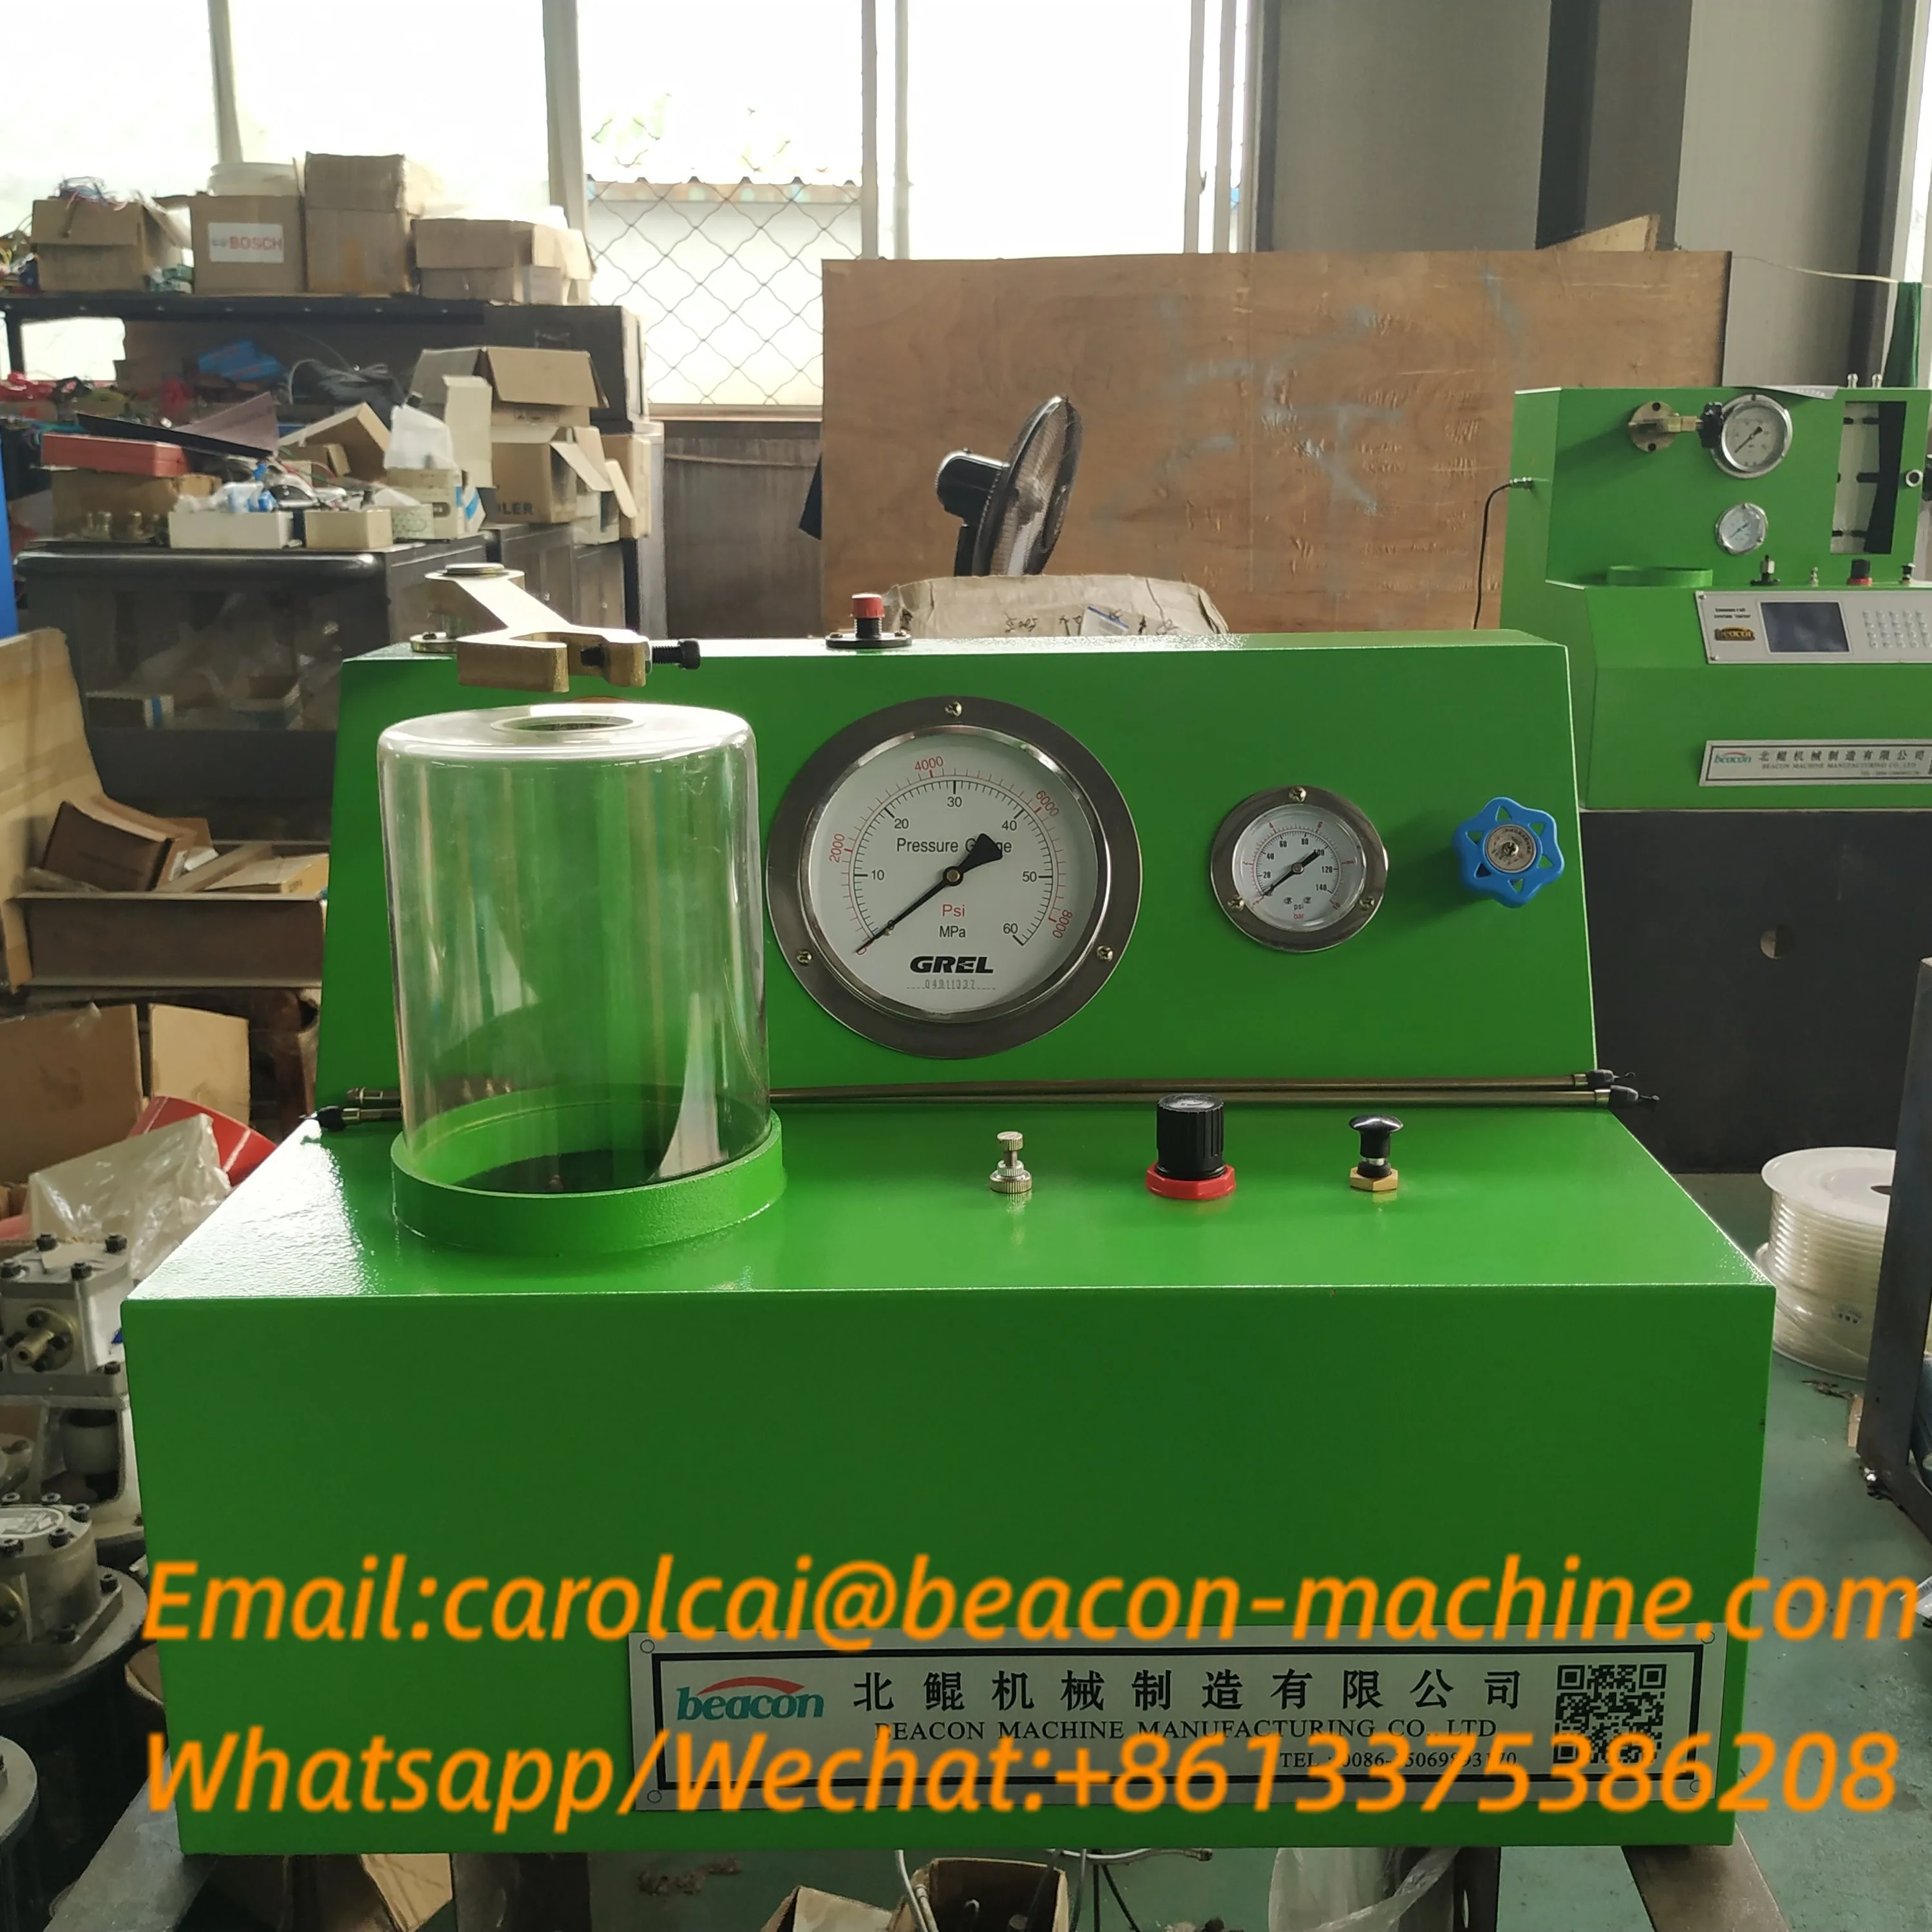 China PQ2000 Common Rail Injector Tester Manufacturer and Supplier